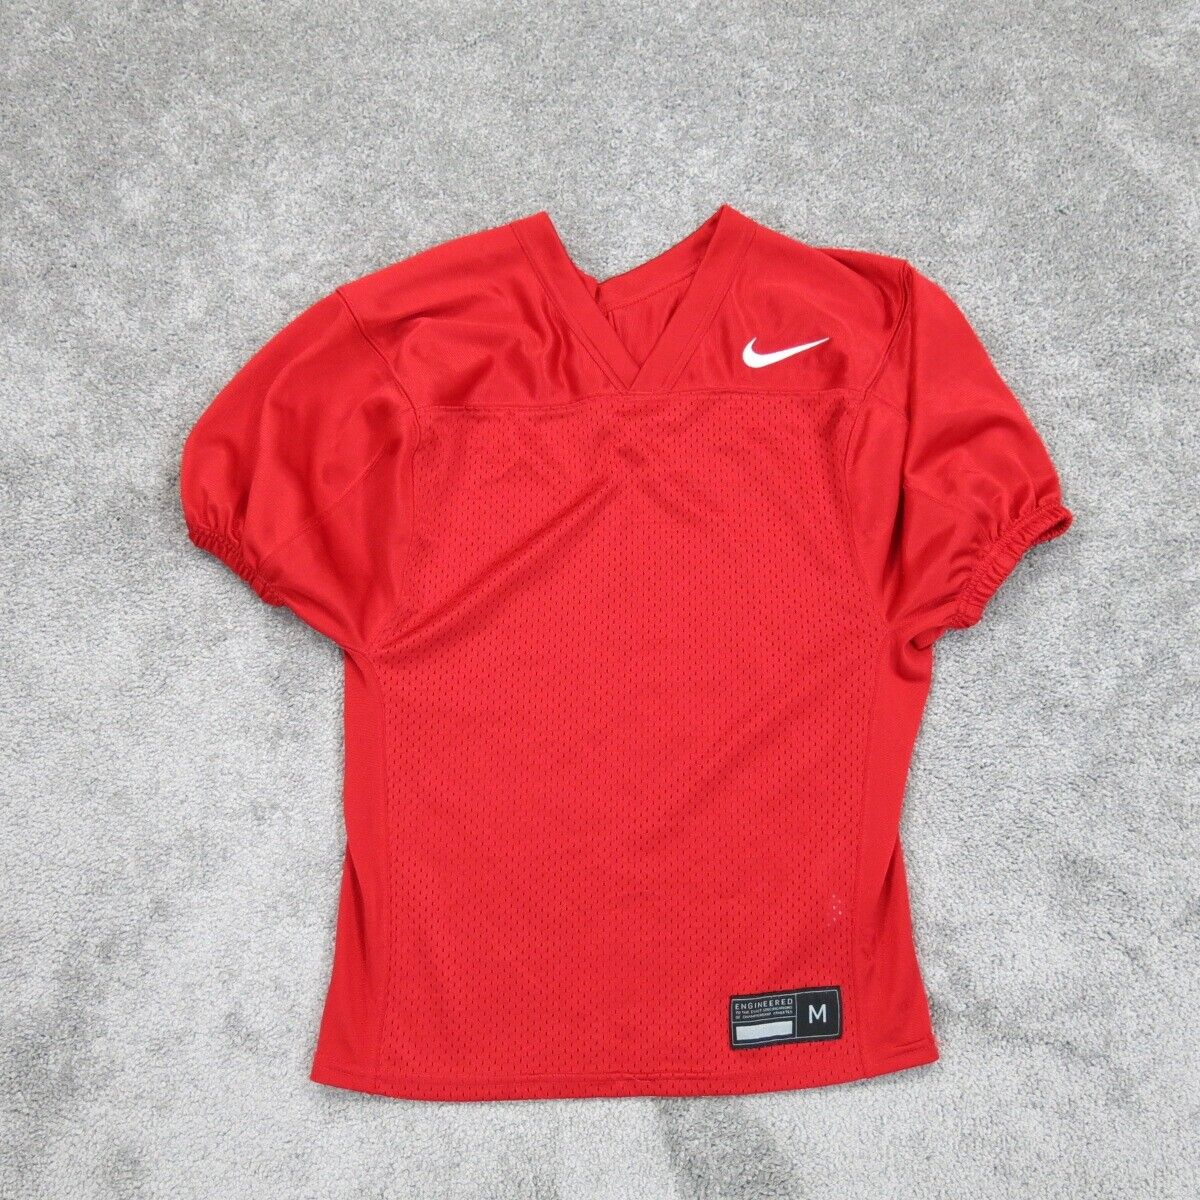 Nike Womens Pullover T Shirt Top Puff Sleeves V Neck Solid Red Size Medium